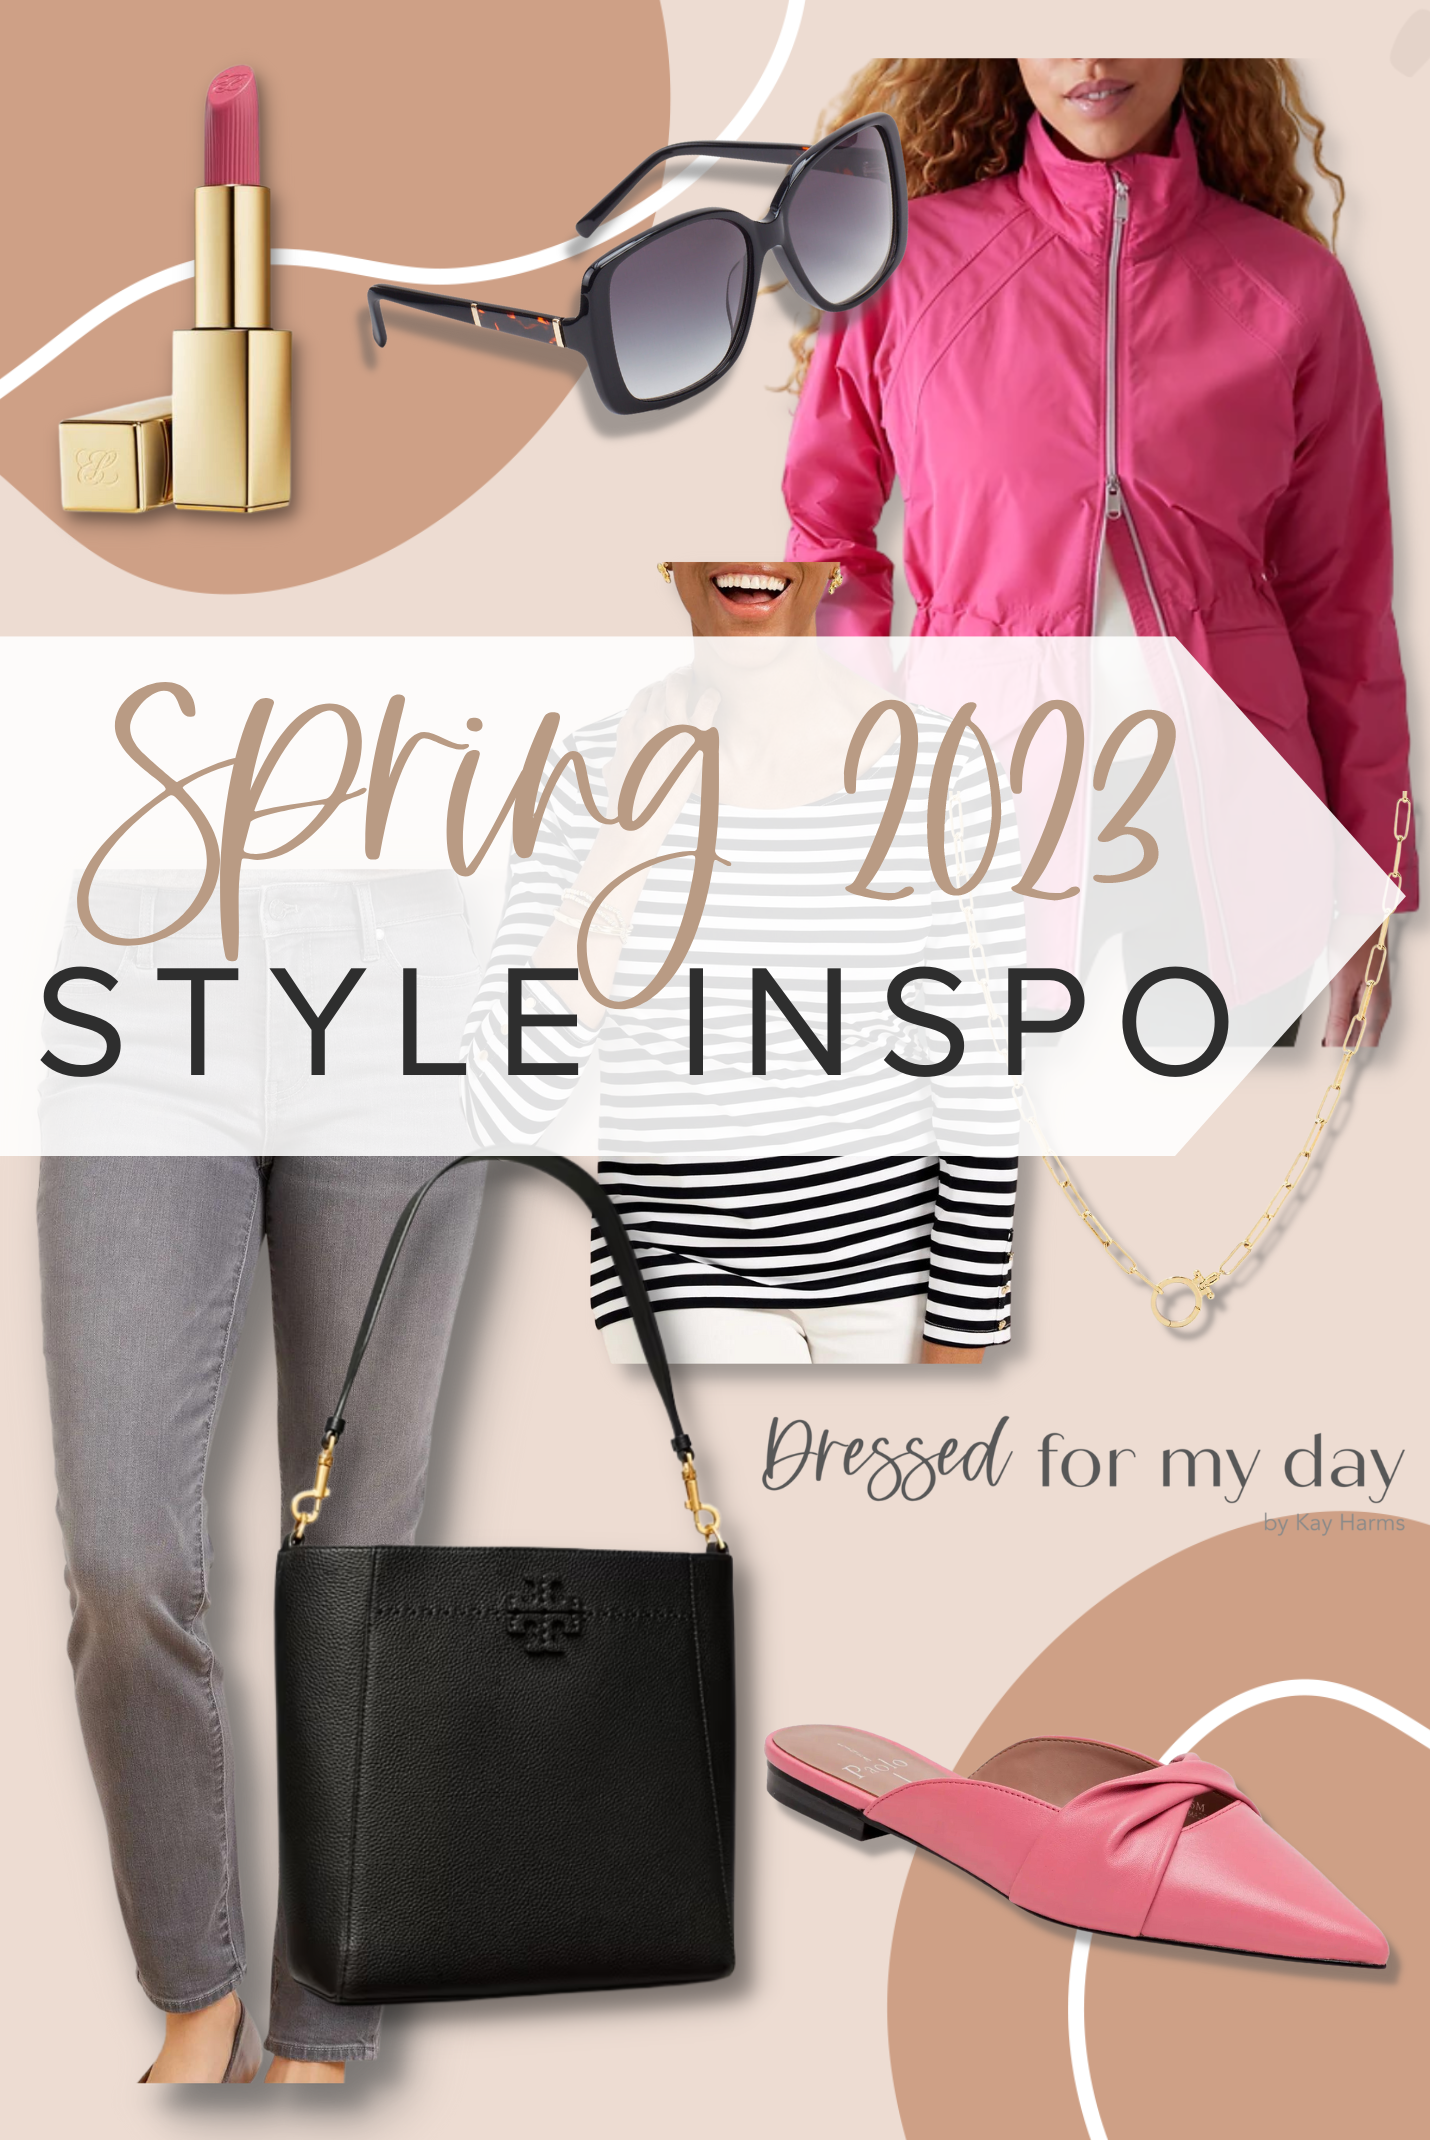 Spring Style Inspiration Boards from Dressed for My Day